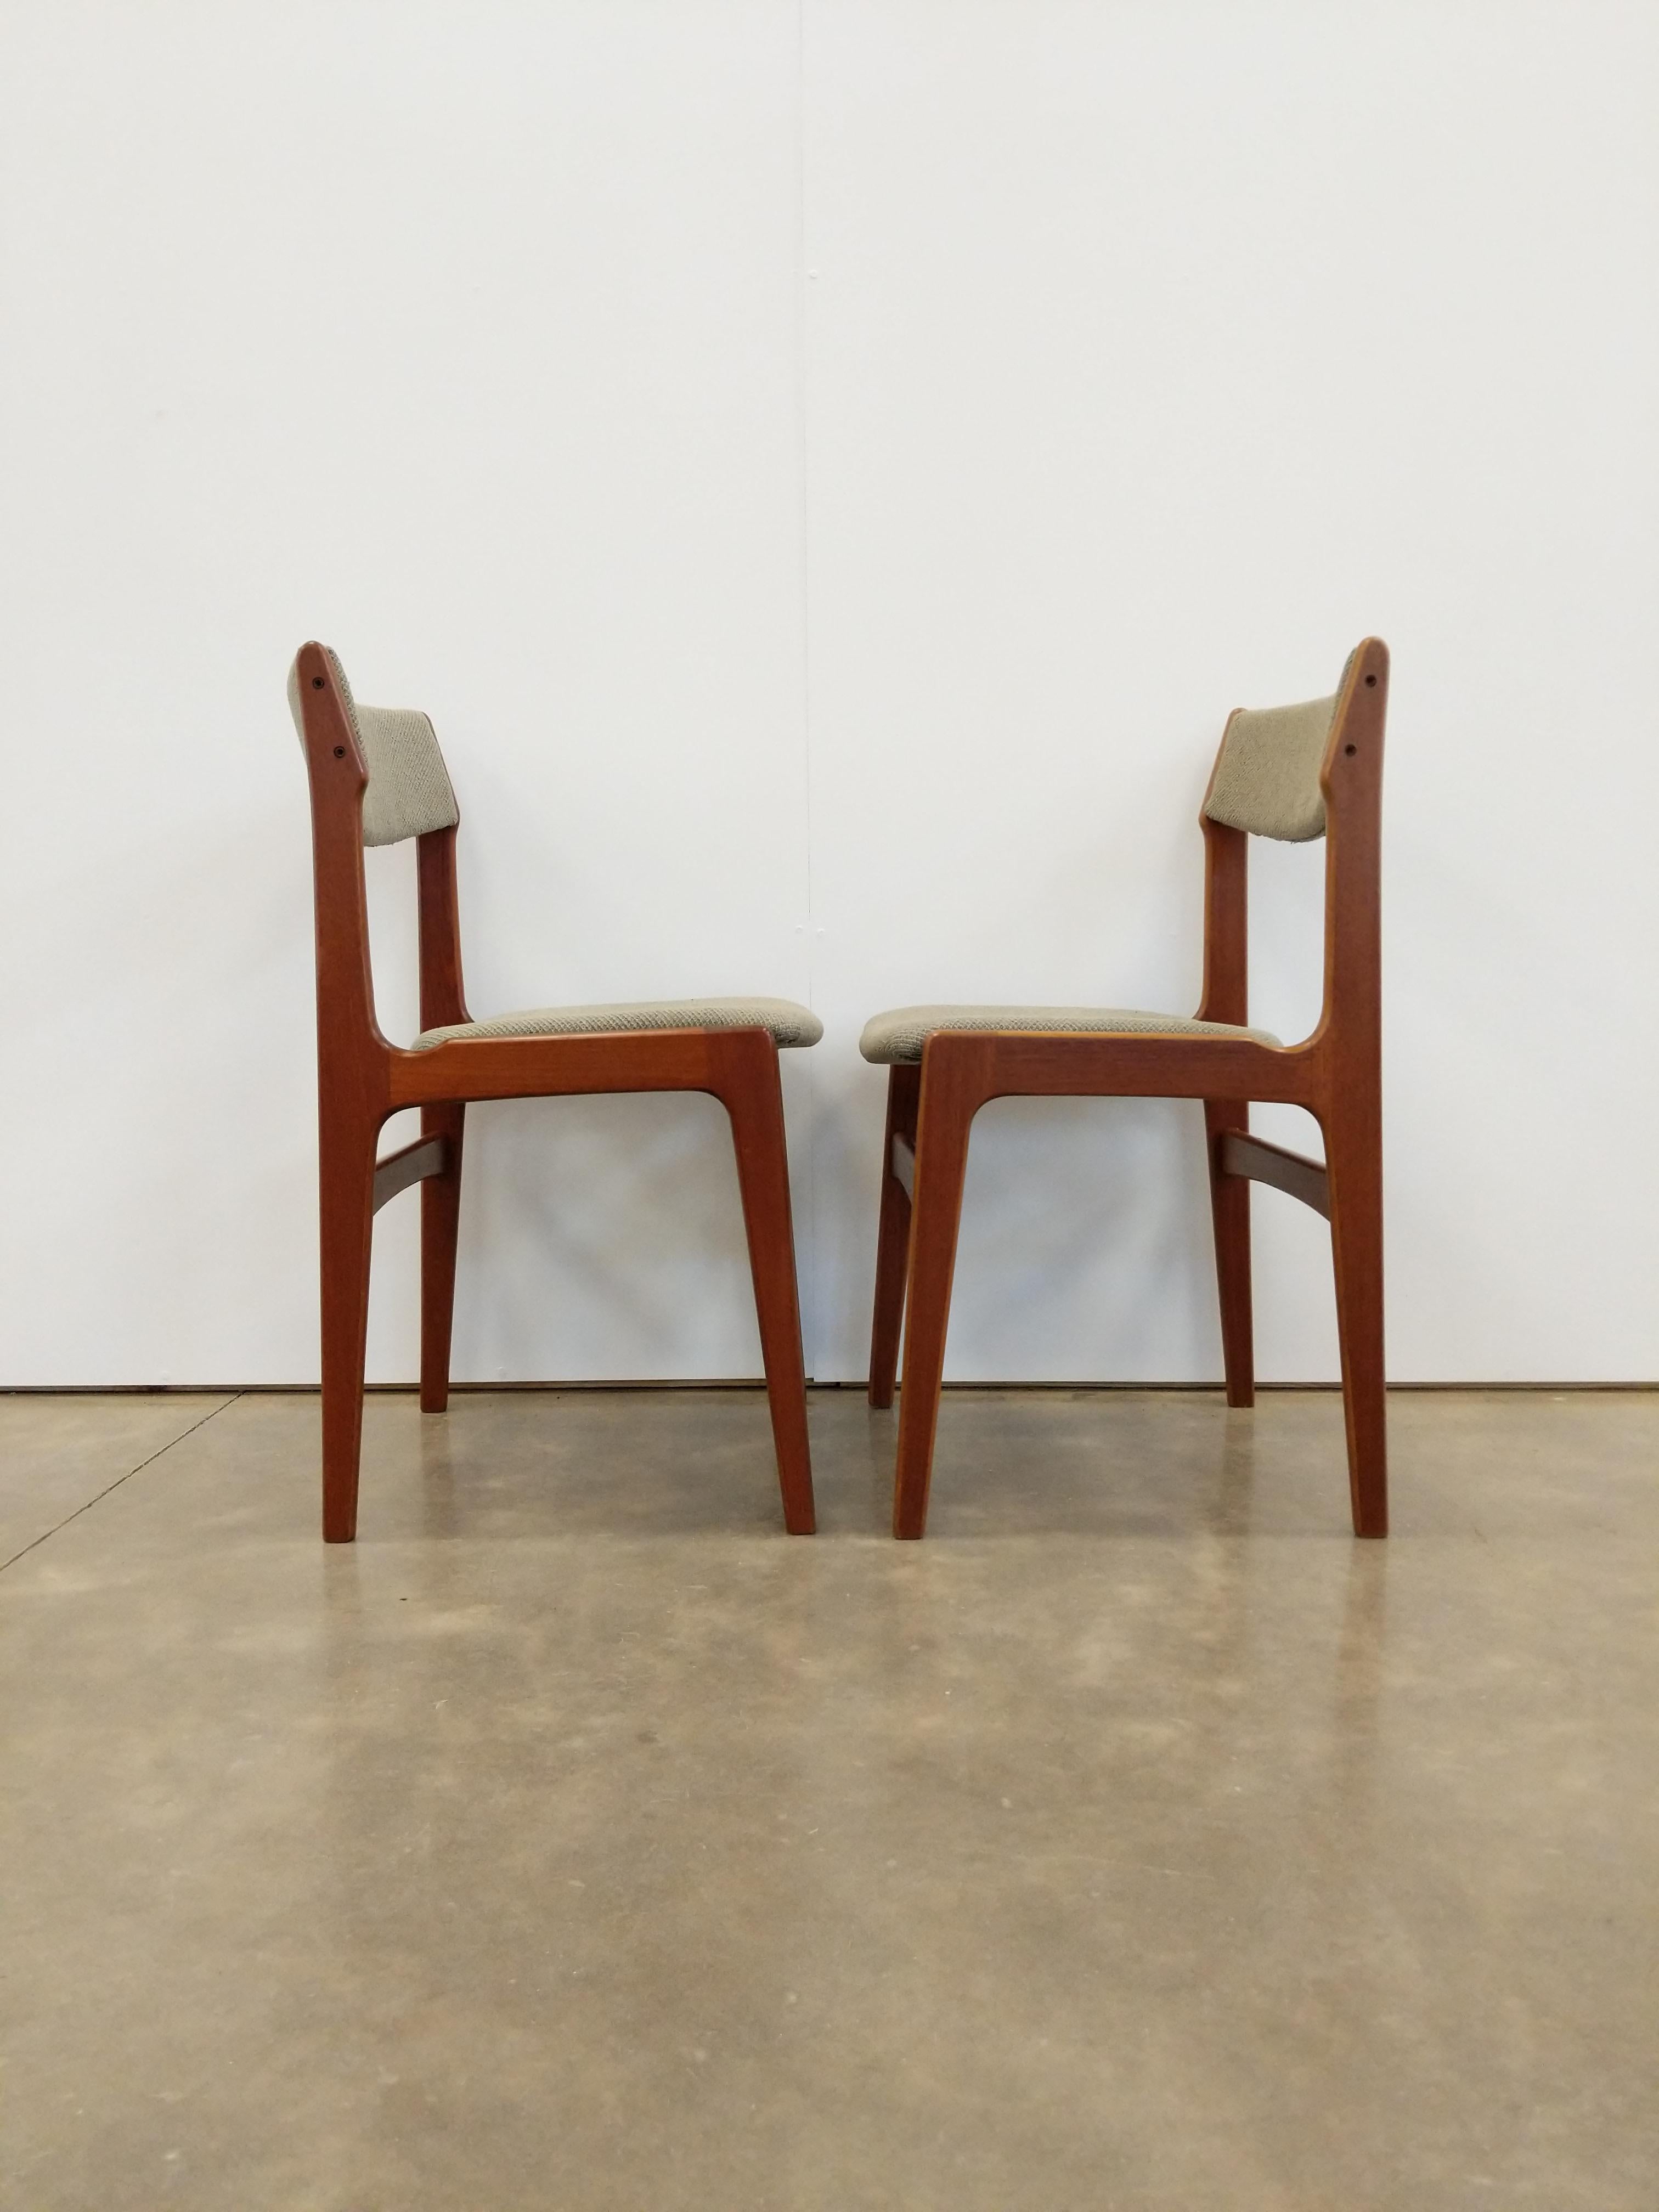 Pair of authentic vintage mid century Danish / Scandinavian Modern dining chairs.

Designed by Erik Buch for Anderstrup Møbelfabrik.

This set is in excellent refurbished condition with brand new Knoll upholstery and very few signs of age-related